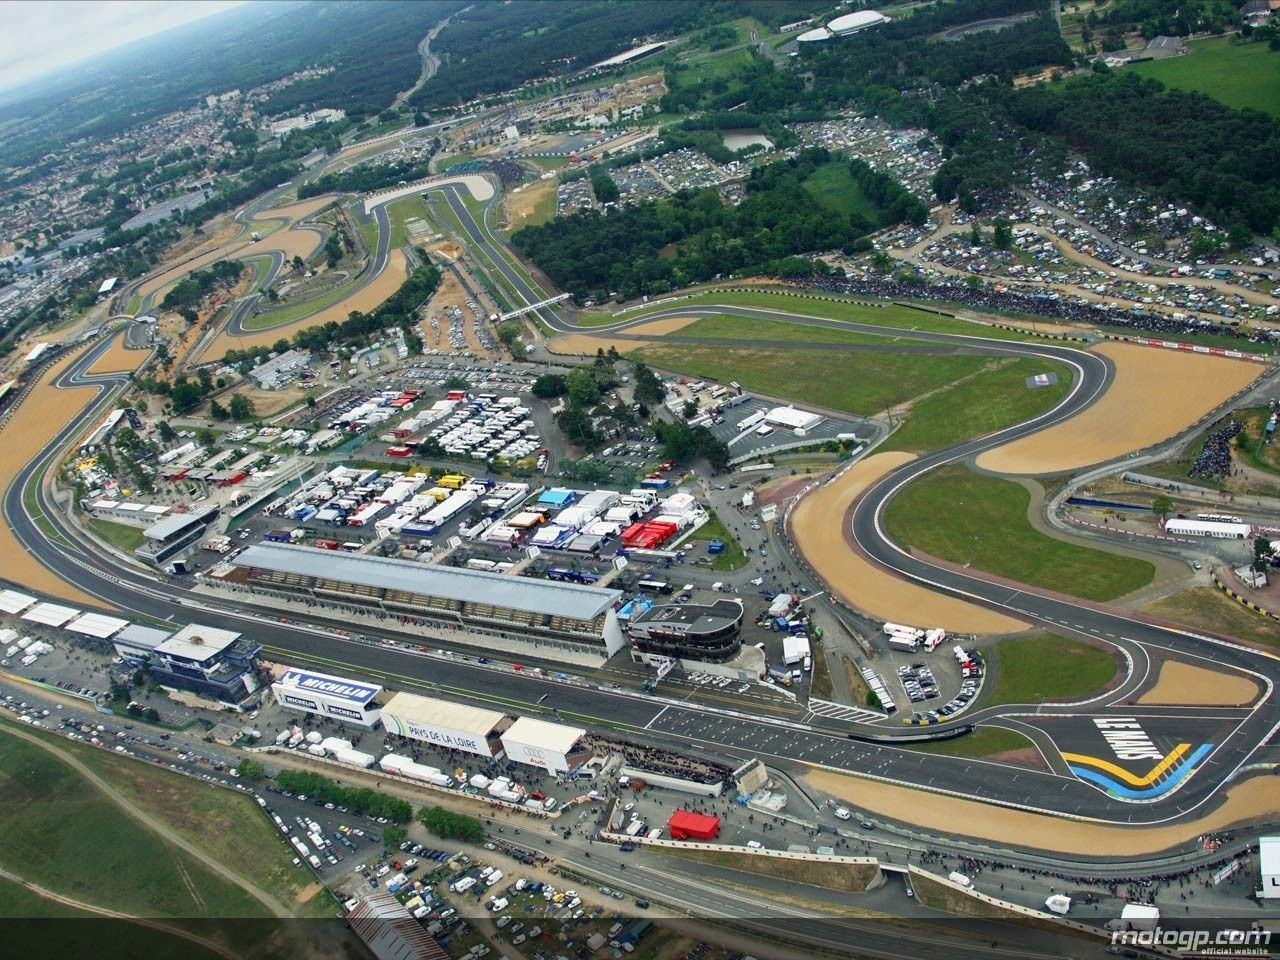 The iconic Le Mans Circuit